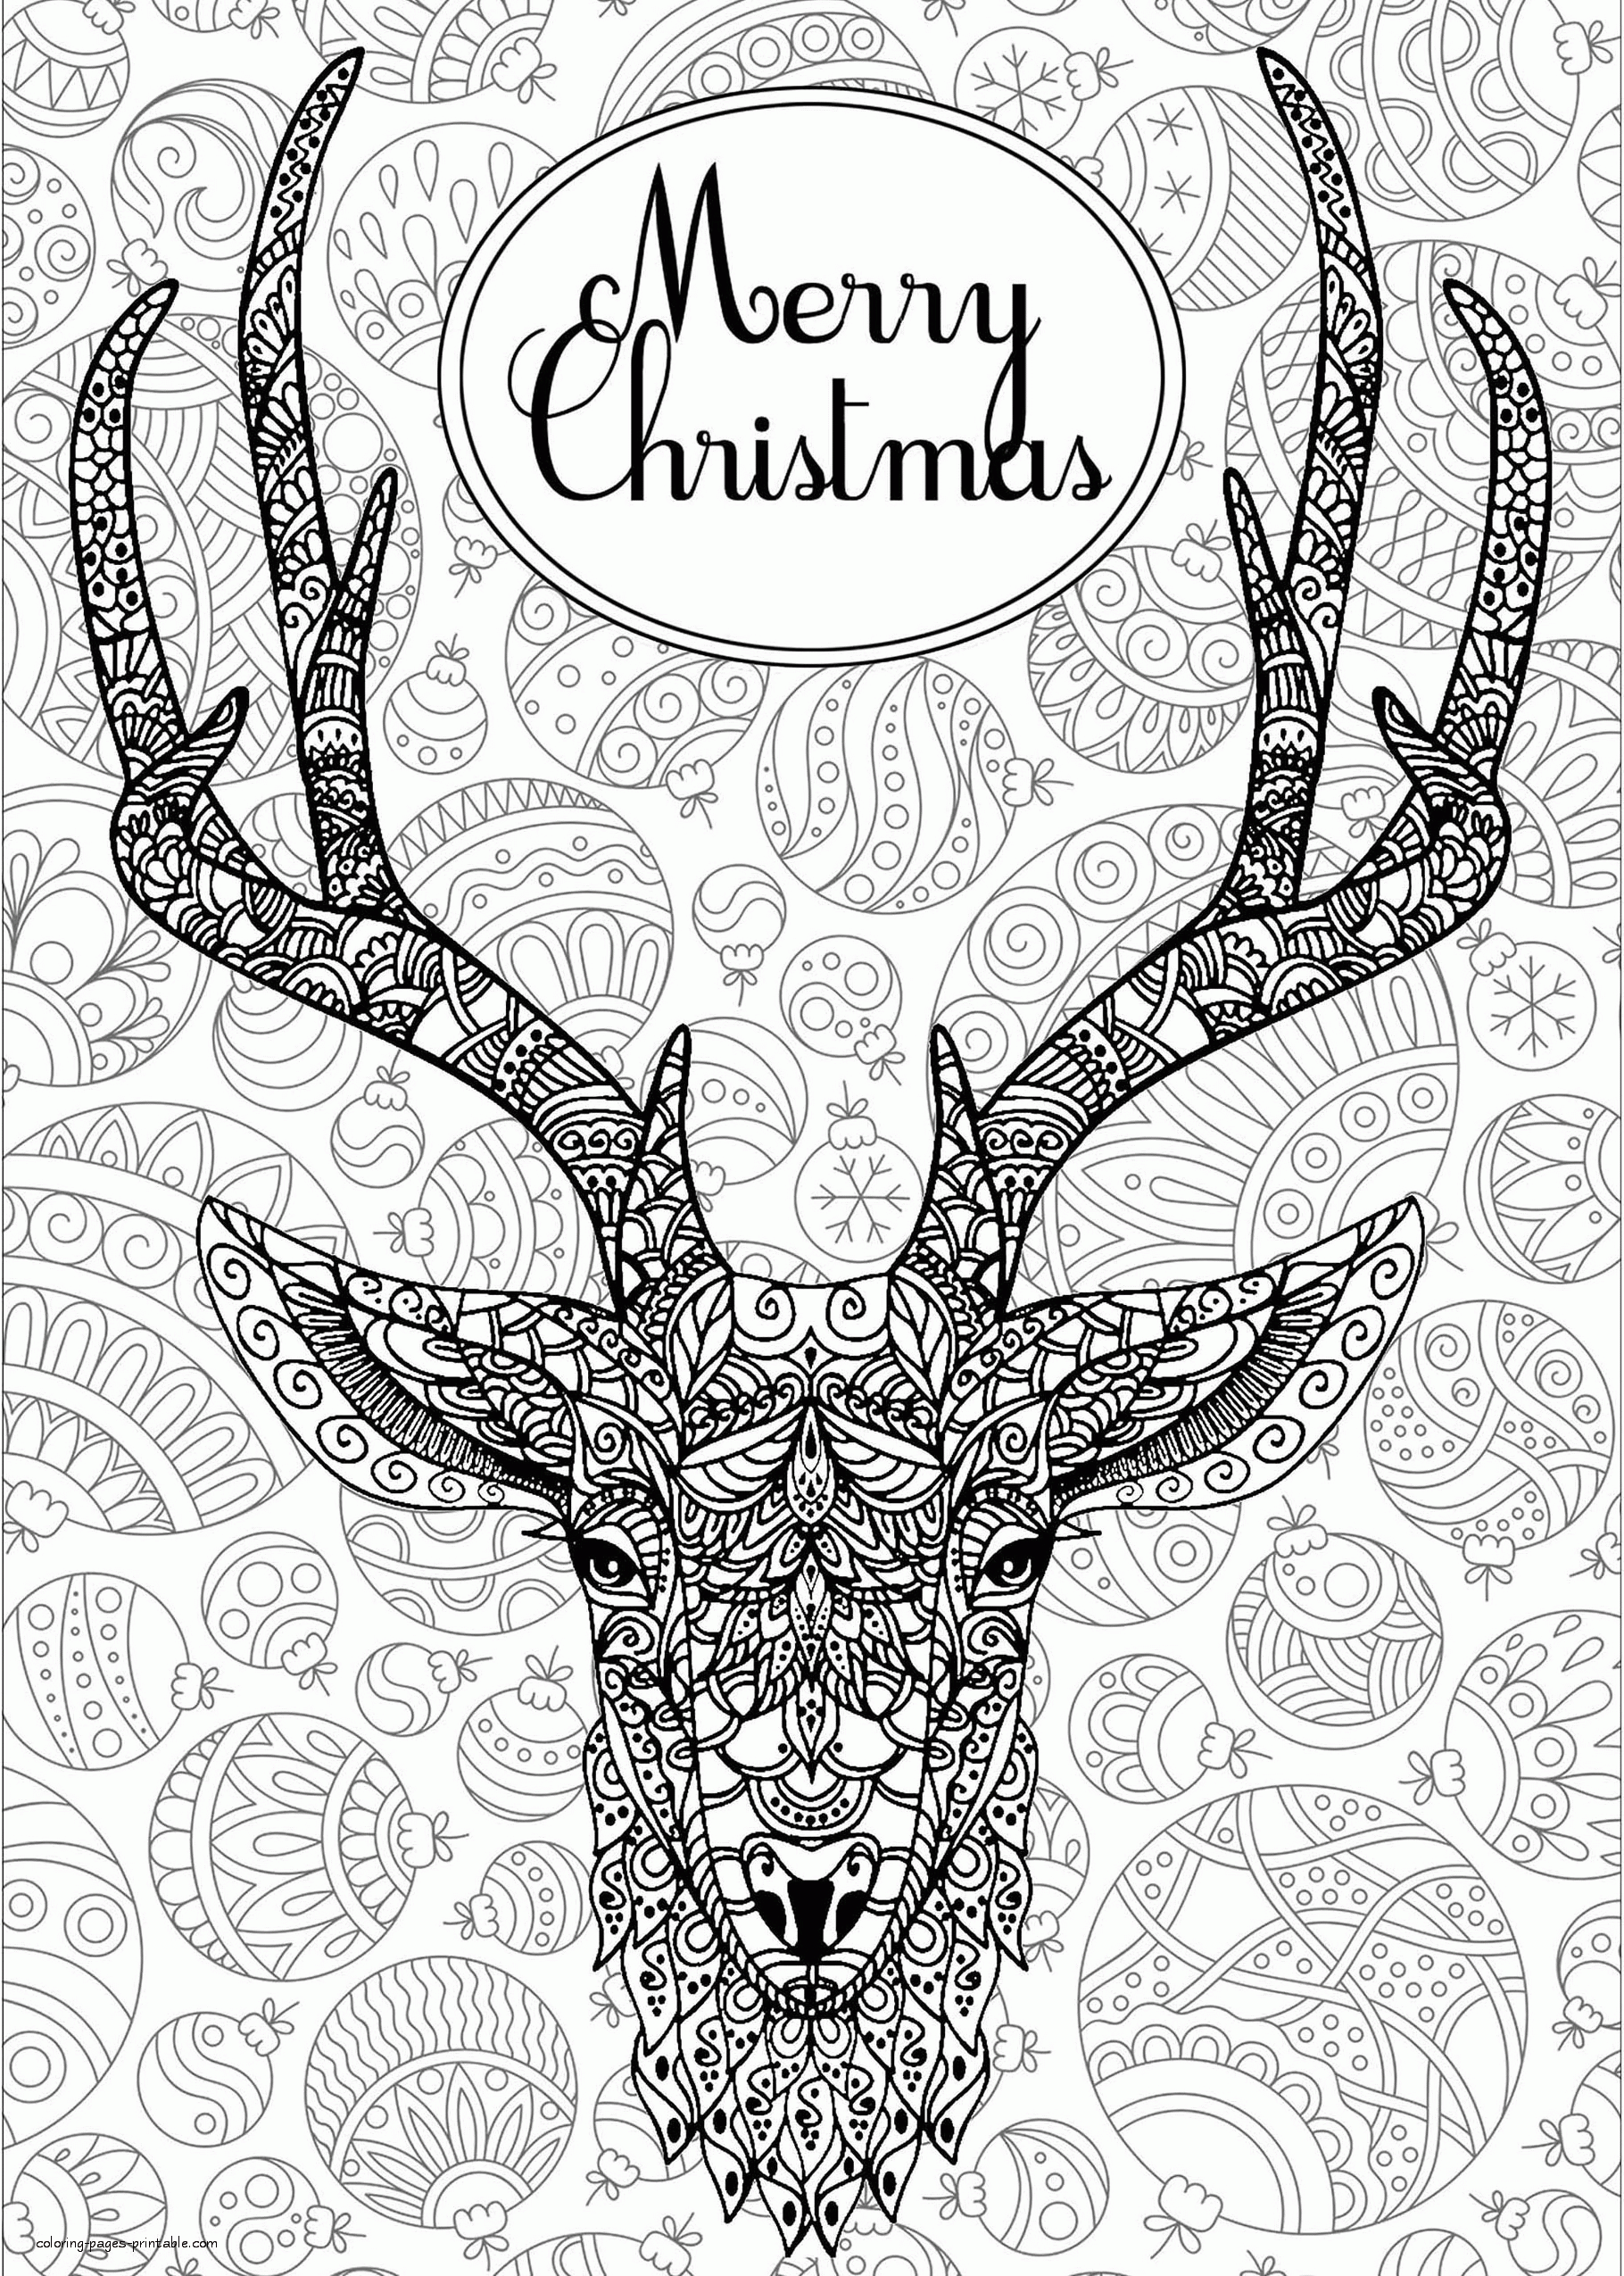 Printable Christmas Coloring Pages For Adults. The Reindeear